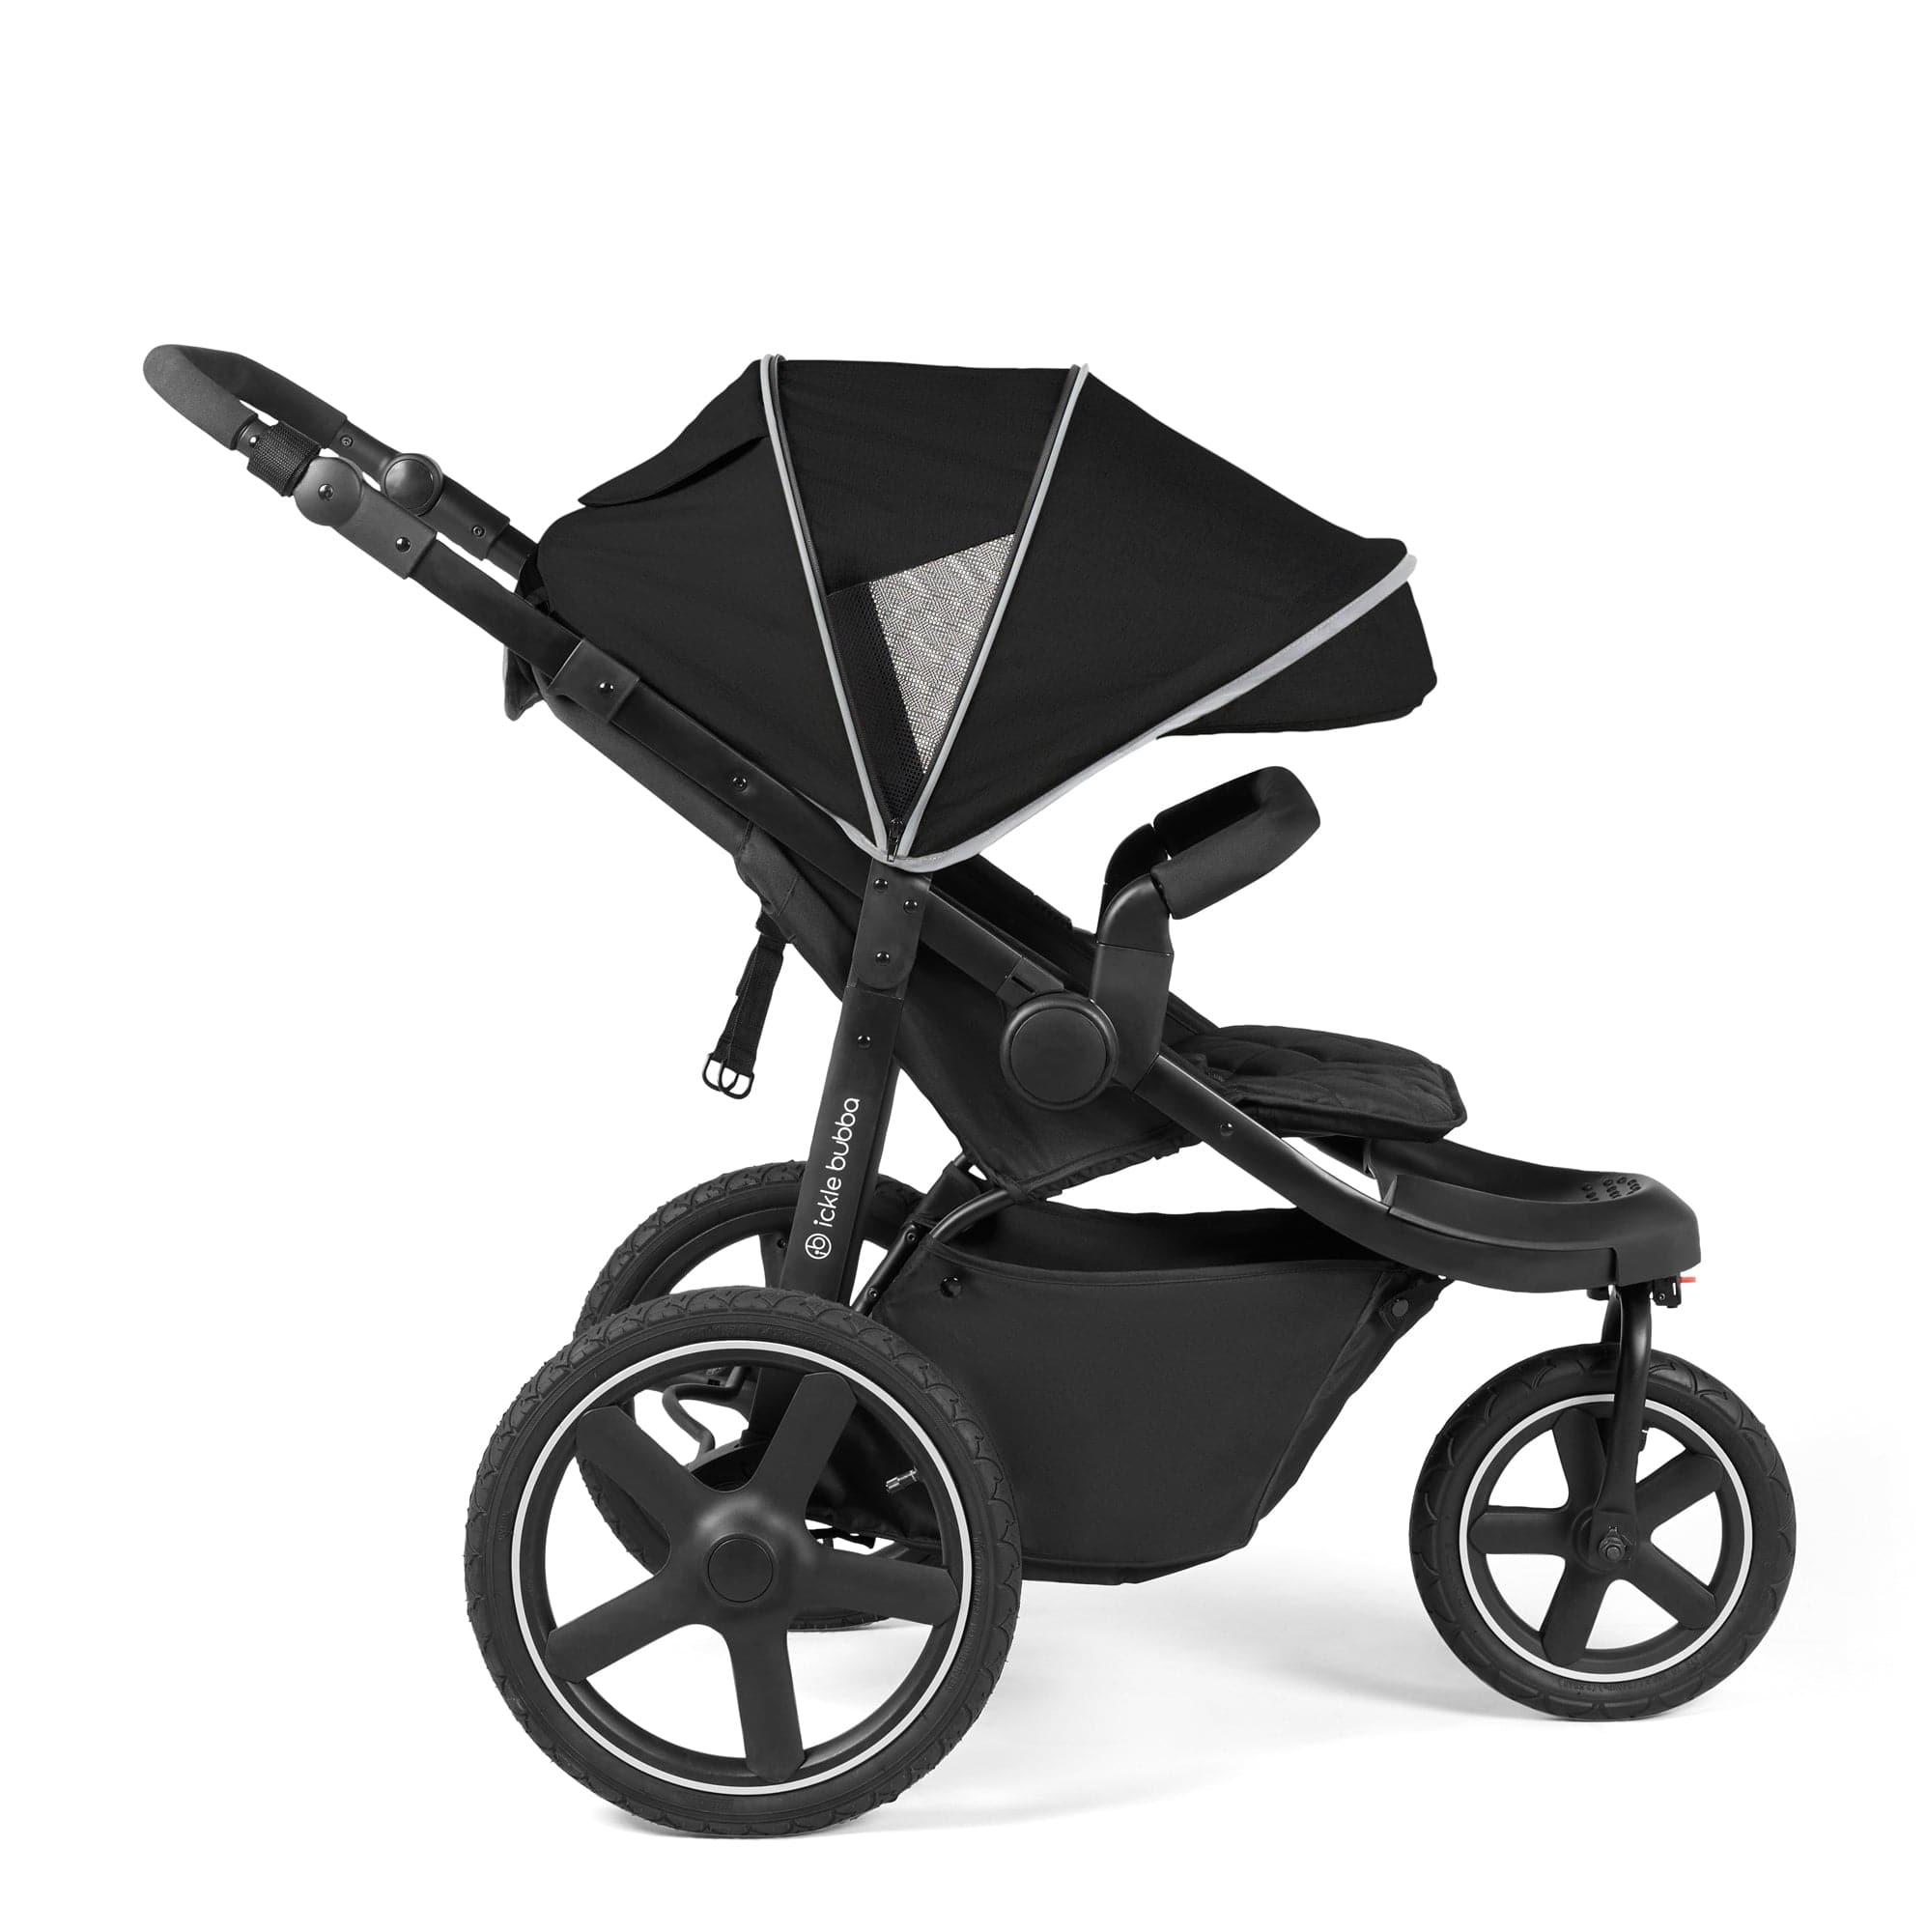 Ickle Bubba Venus Prime Jogger Stroller I-Size Travel System in Black/Black with Base 3 Wheelers